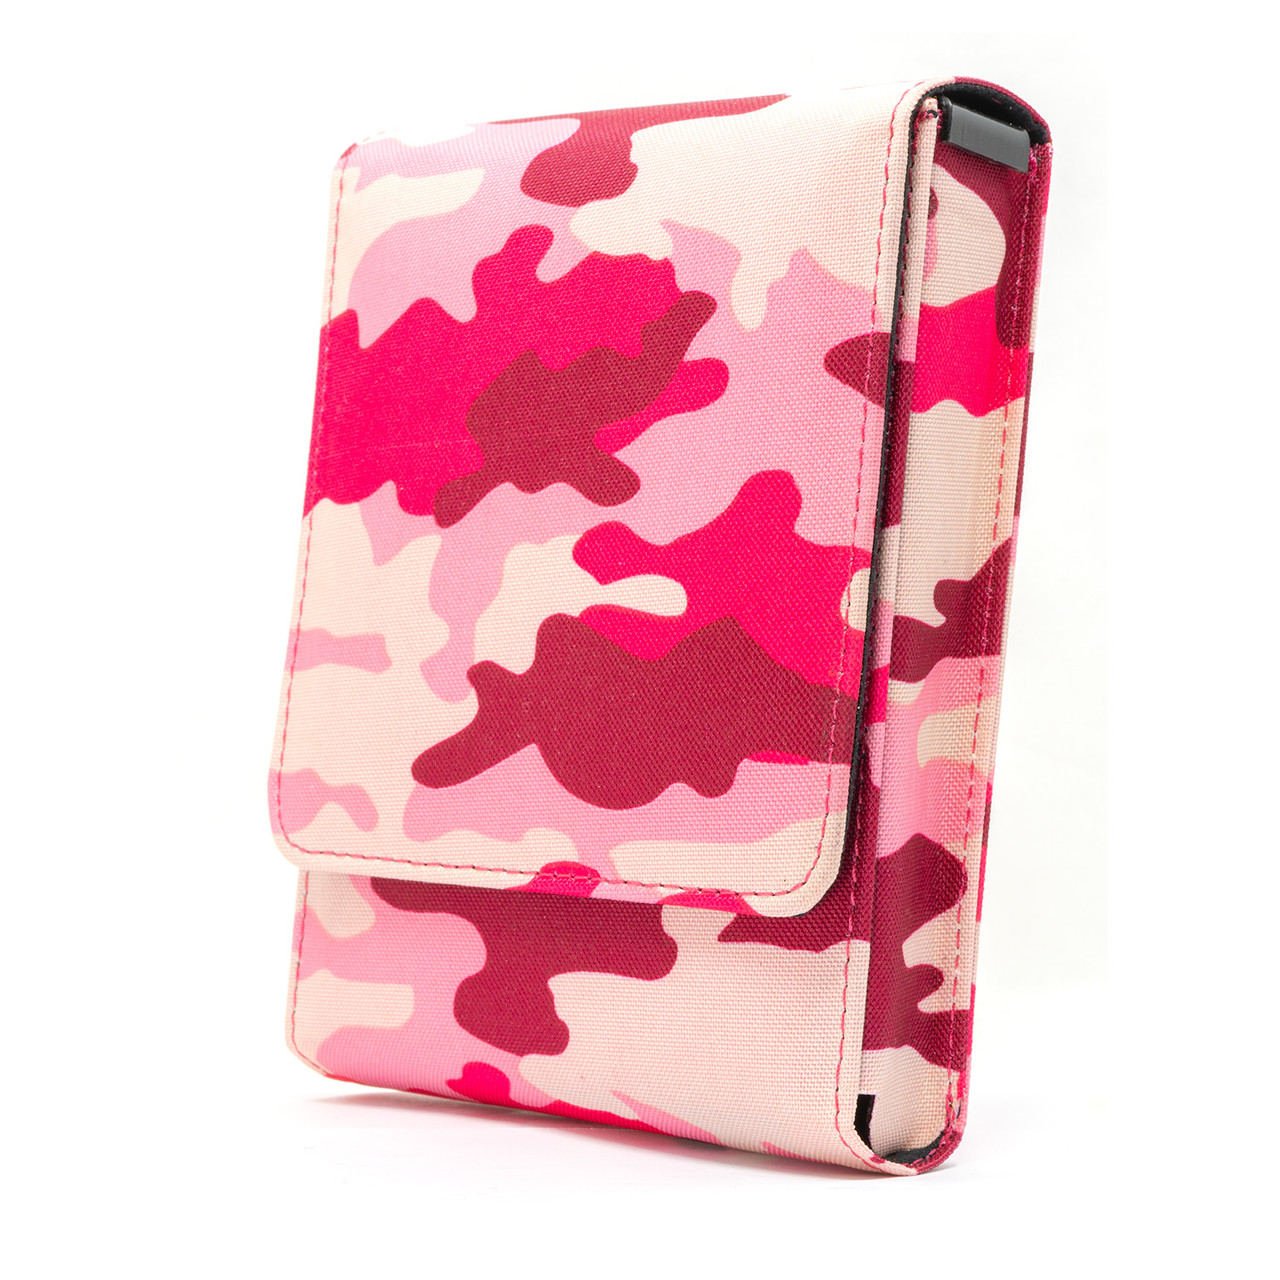 FN 509 Pink Camouflage Series Holster